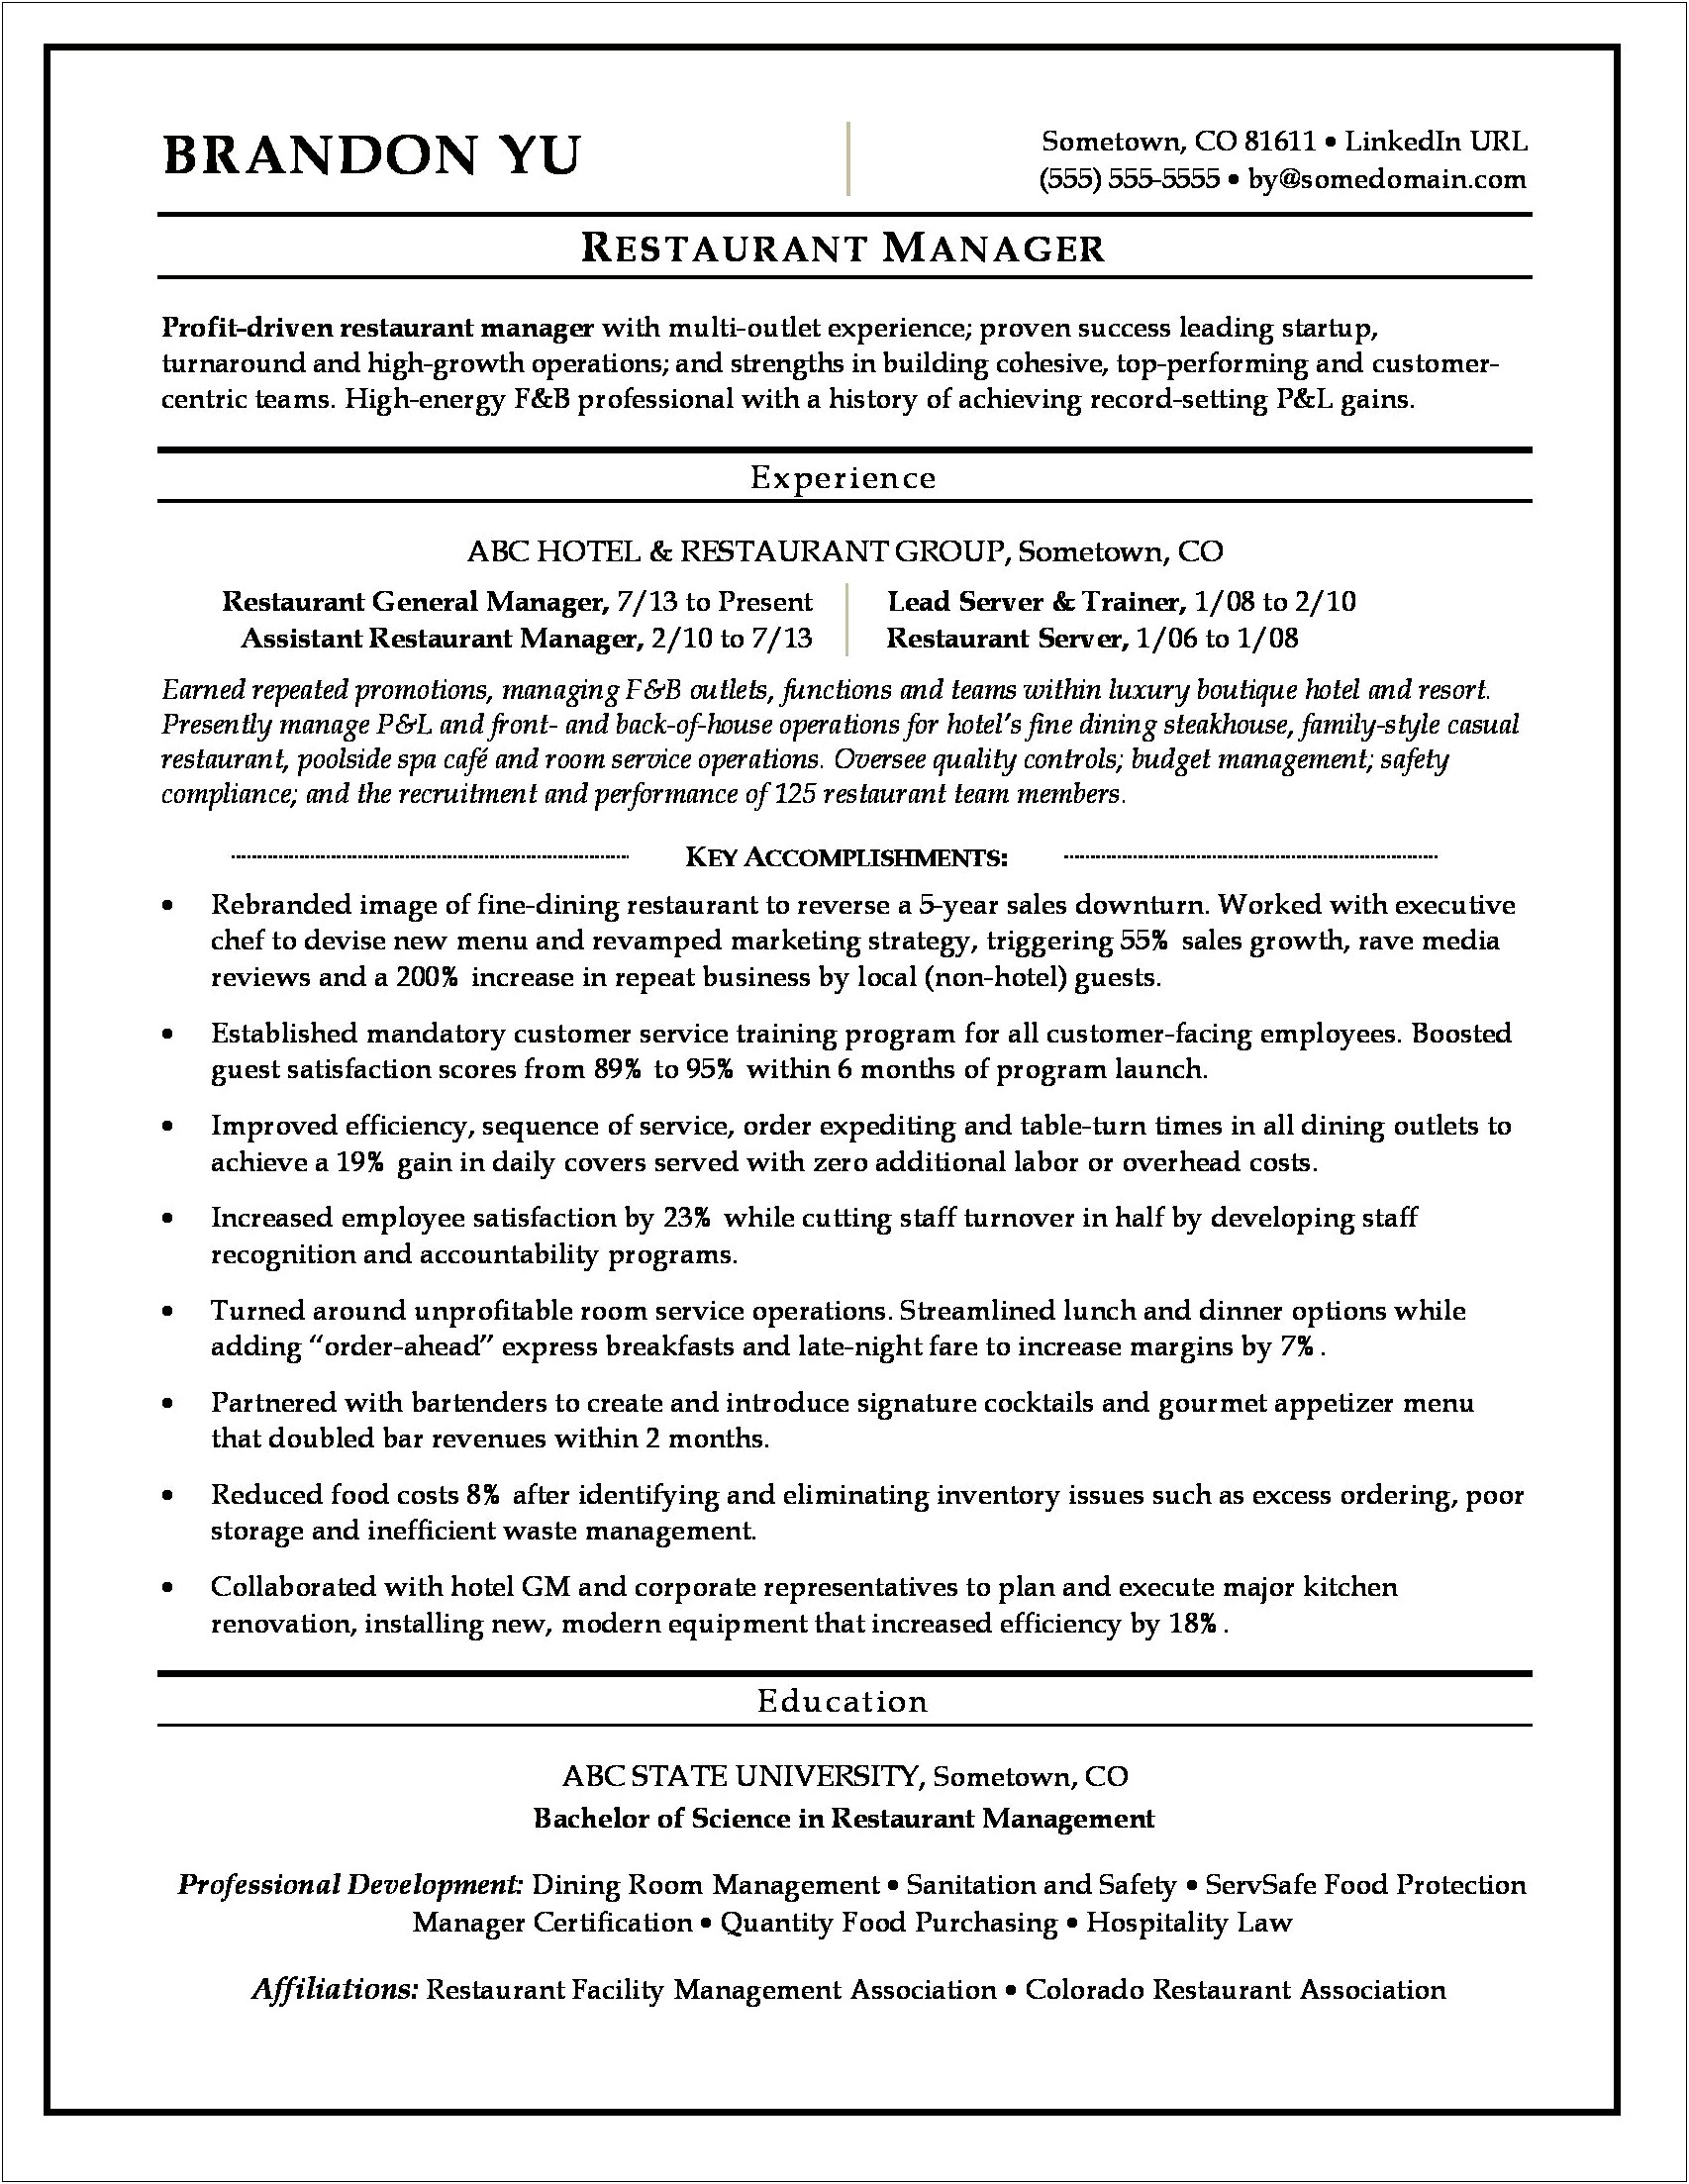 Example Career Highlights For An Operations Executive Resume